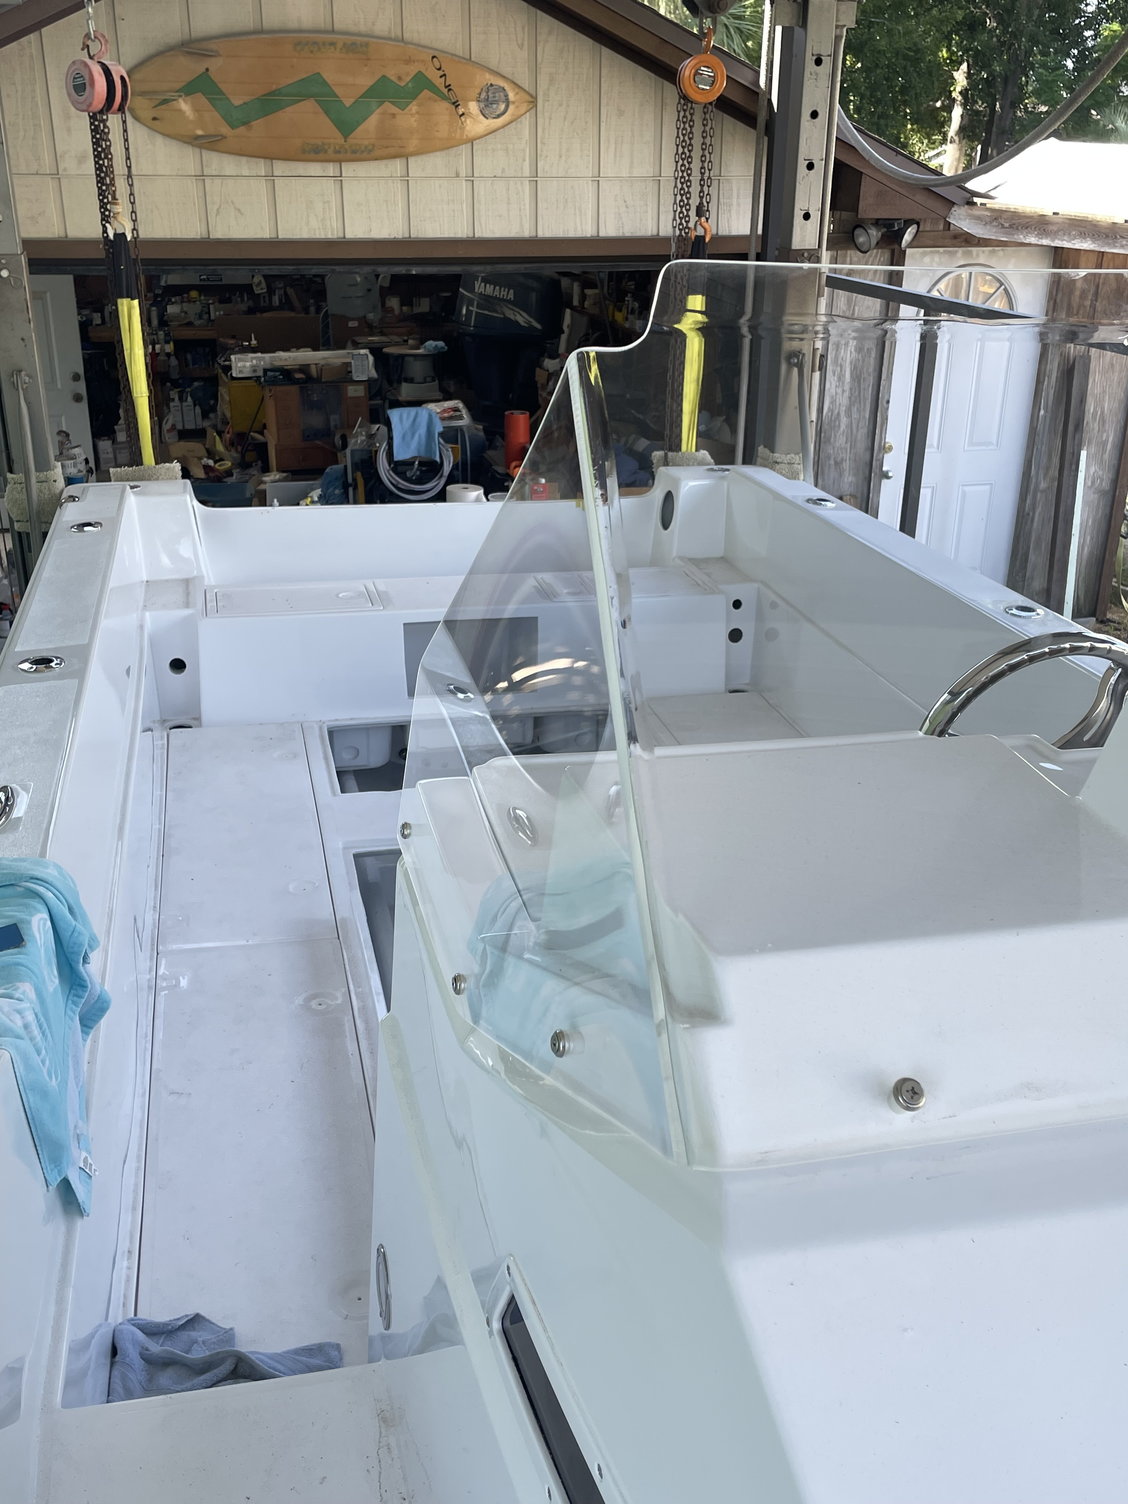 Where to get windshield made - The Hull Truth - Boating and